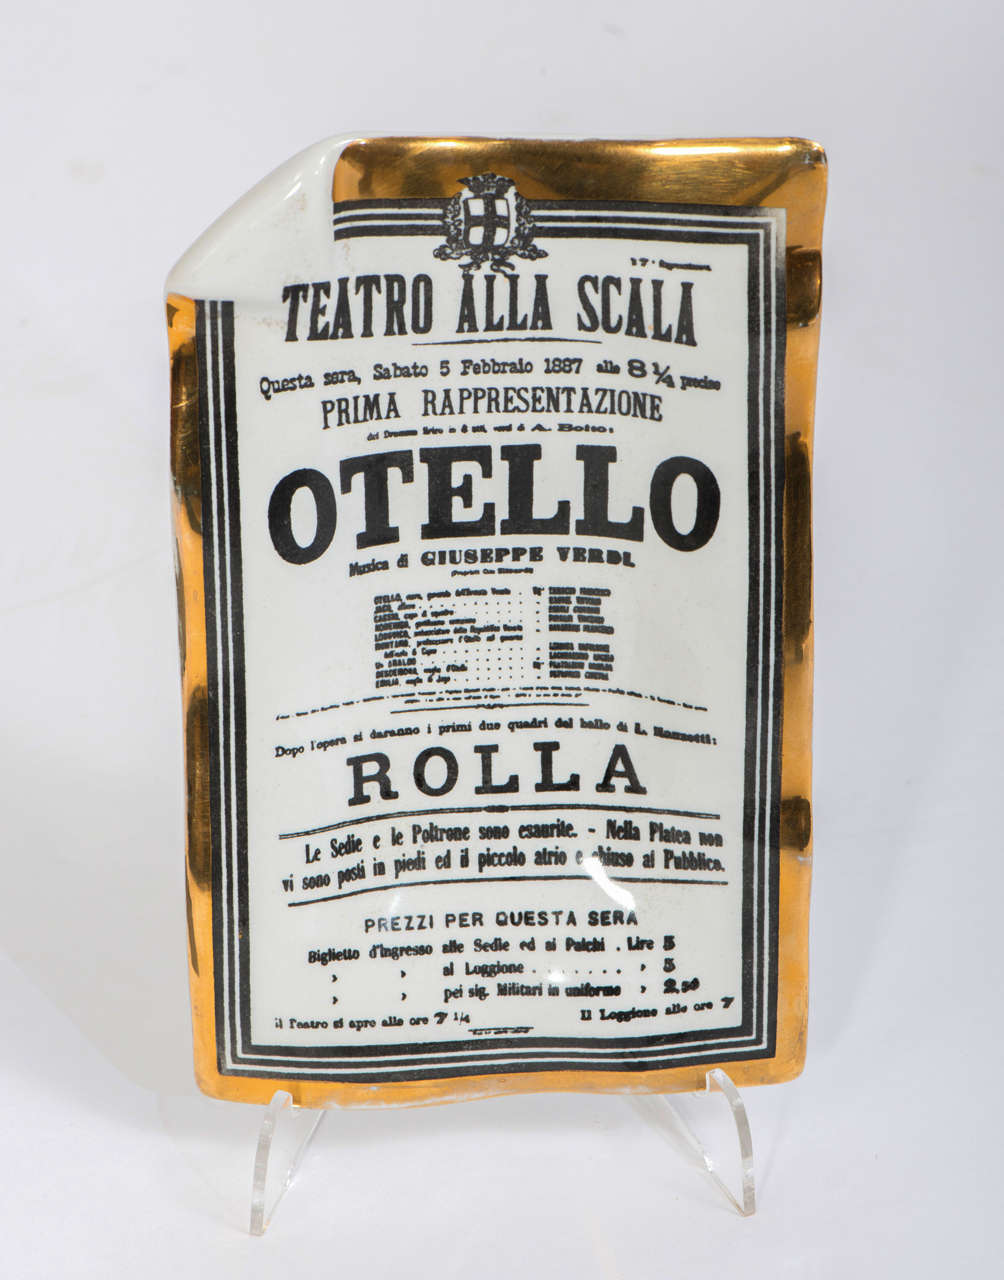 A large Piero Fornasetti Ashtray.
“Teatro alla Scala- Otello”
Lithographically printed porcelain with gilt highlights.
Marks to back.
Italy, circa 1950
21cms w x 13cms d x 2.5cms h